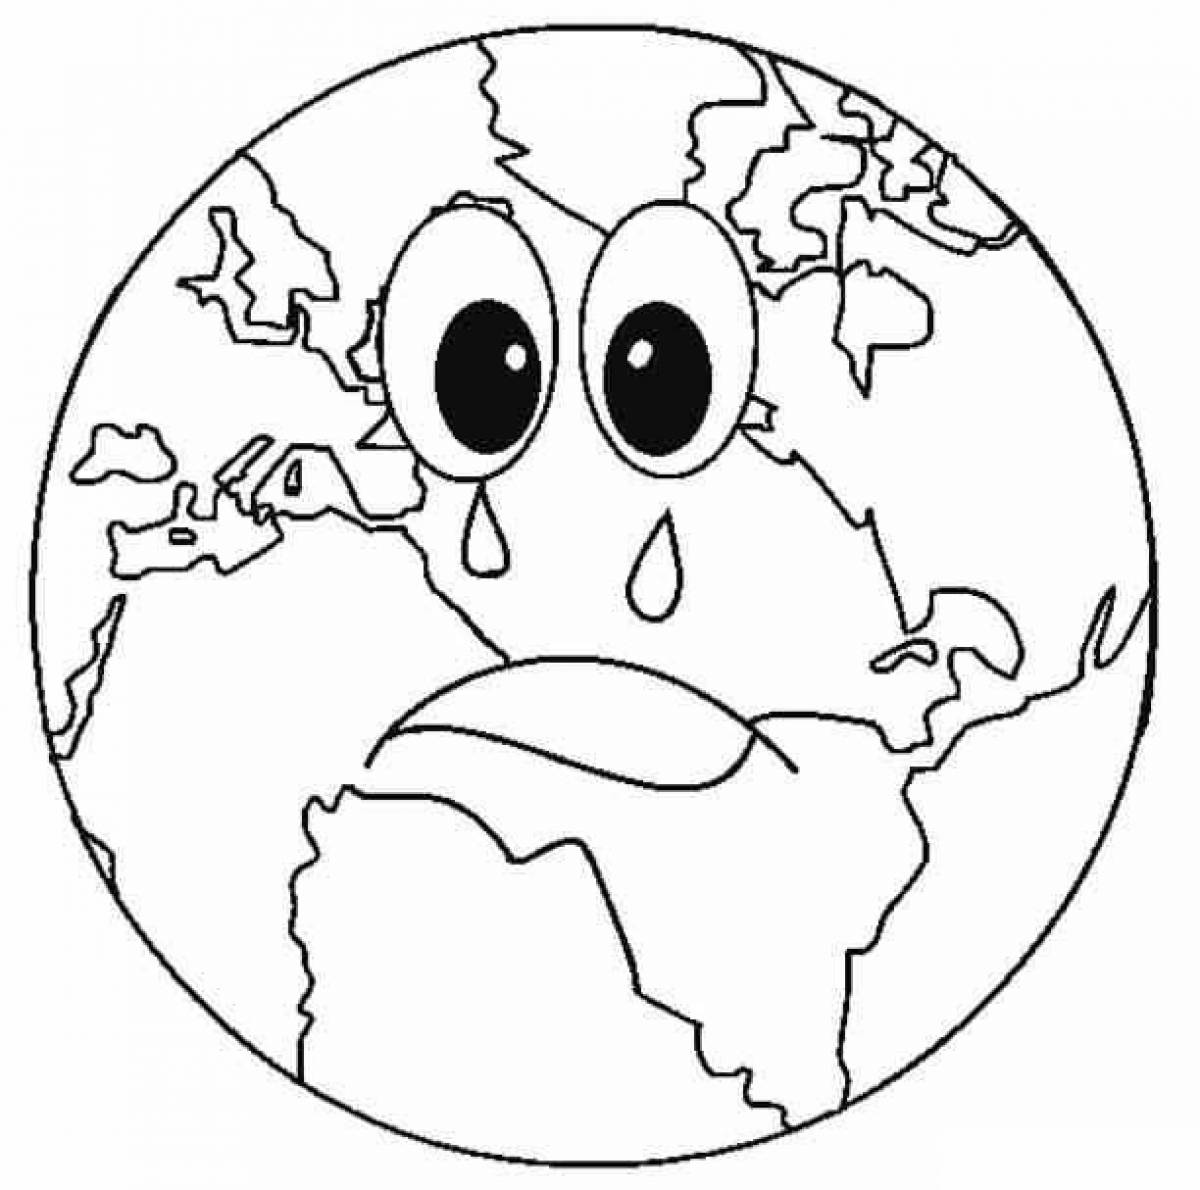 Colorful planet earth coloring page for kids